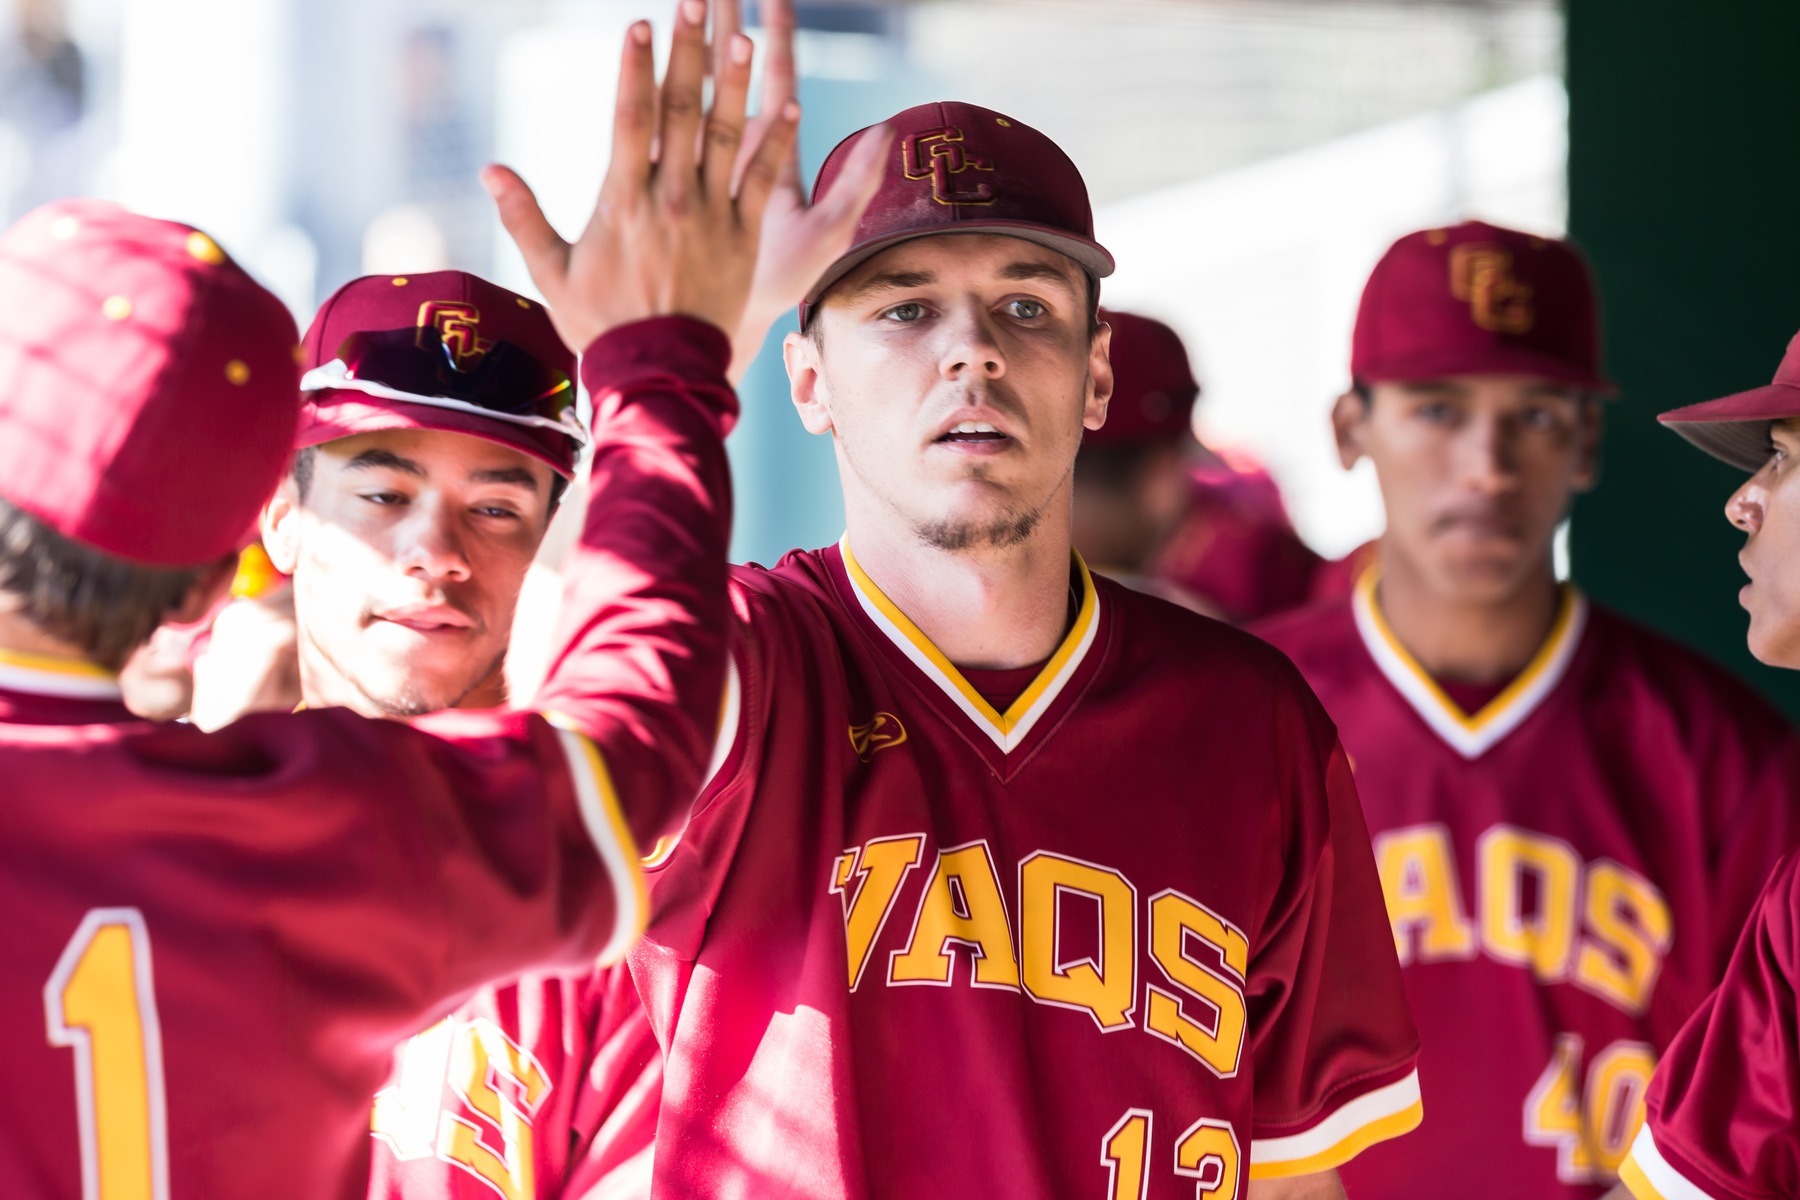 Chris Davidson pitches four hitter to help beat Canyons, 9-0